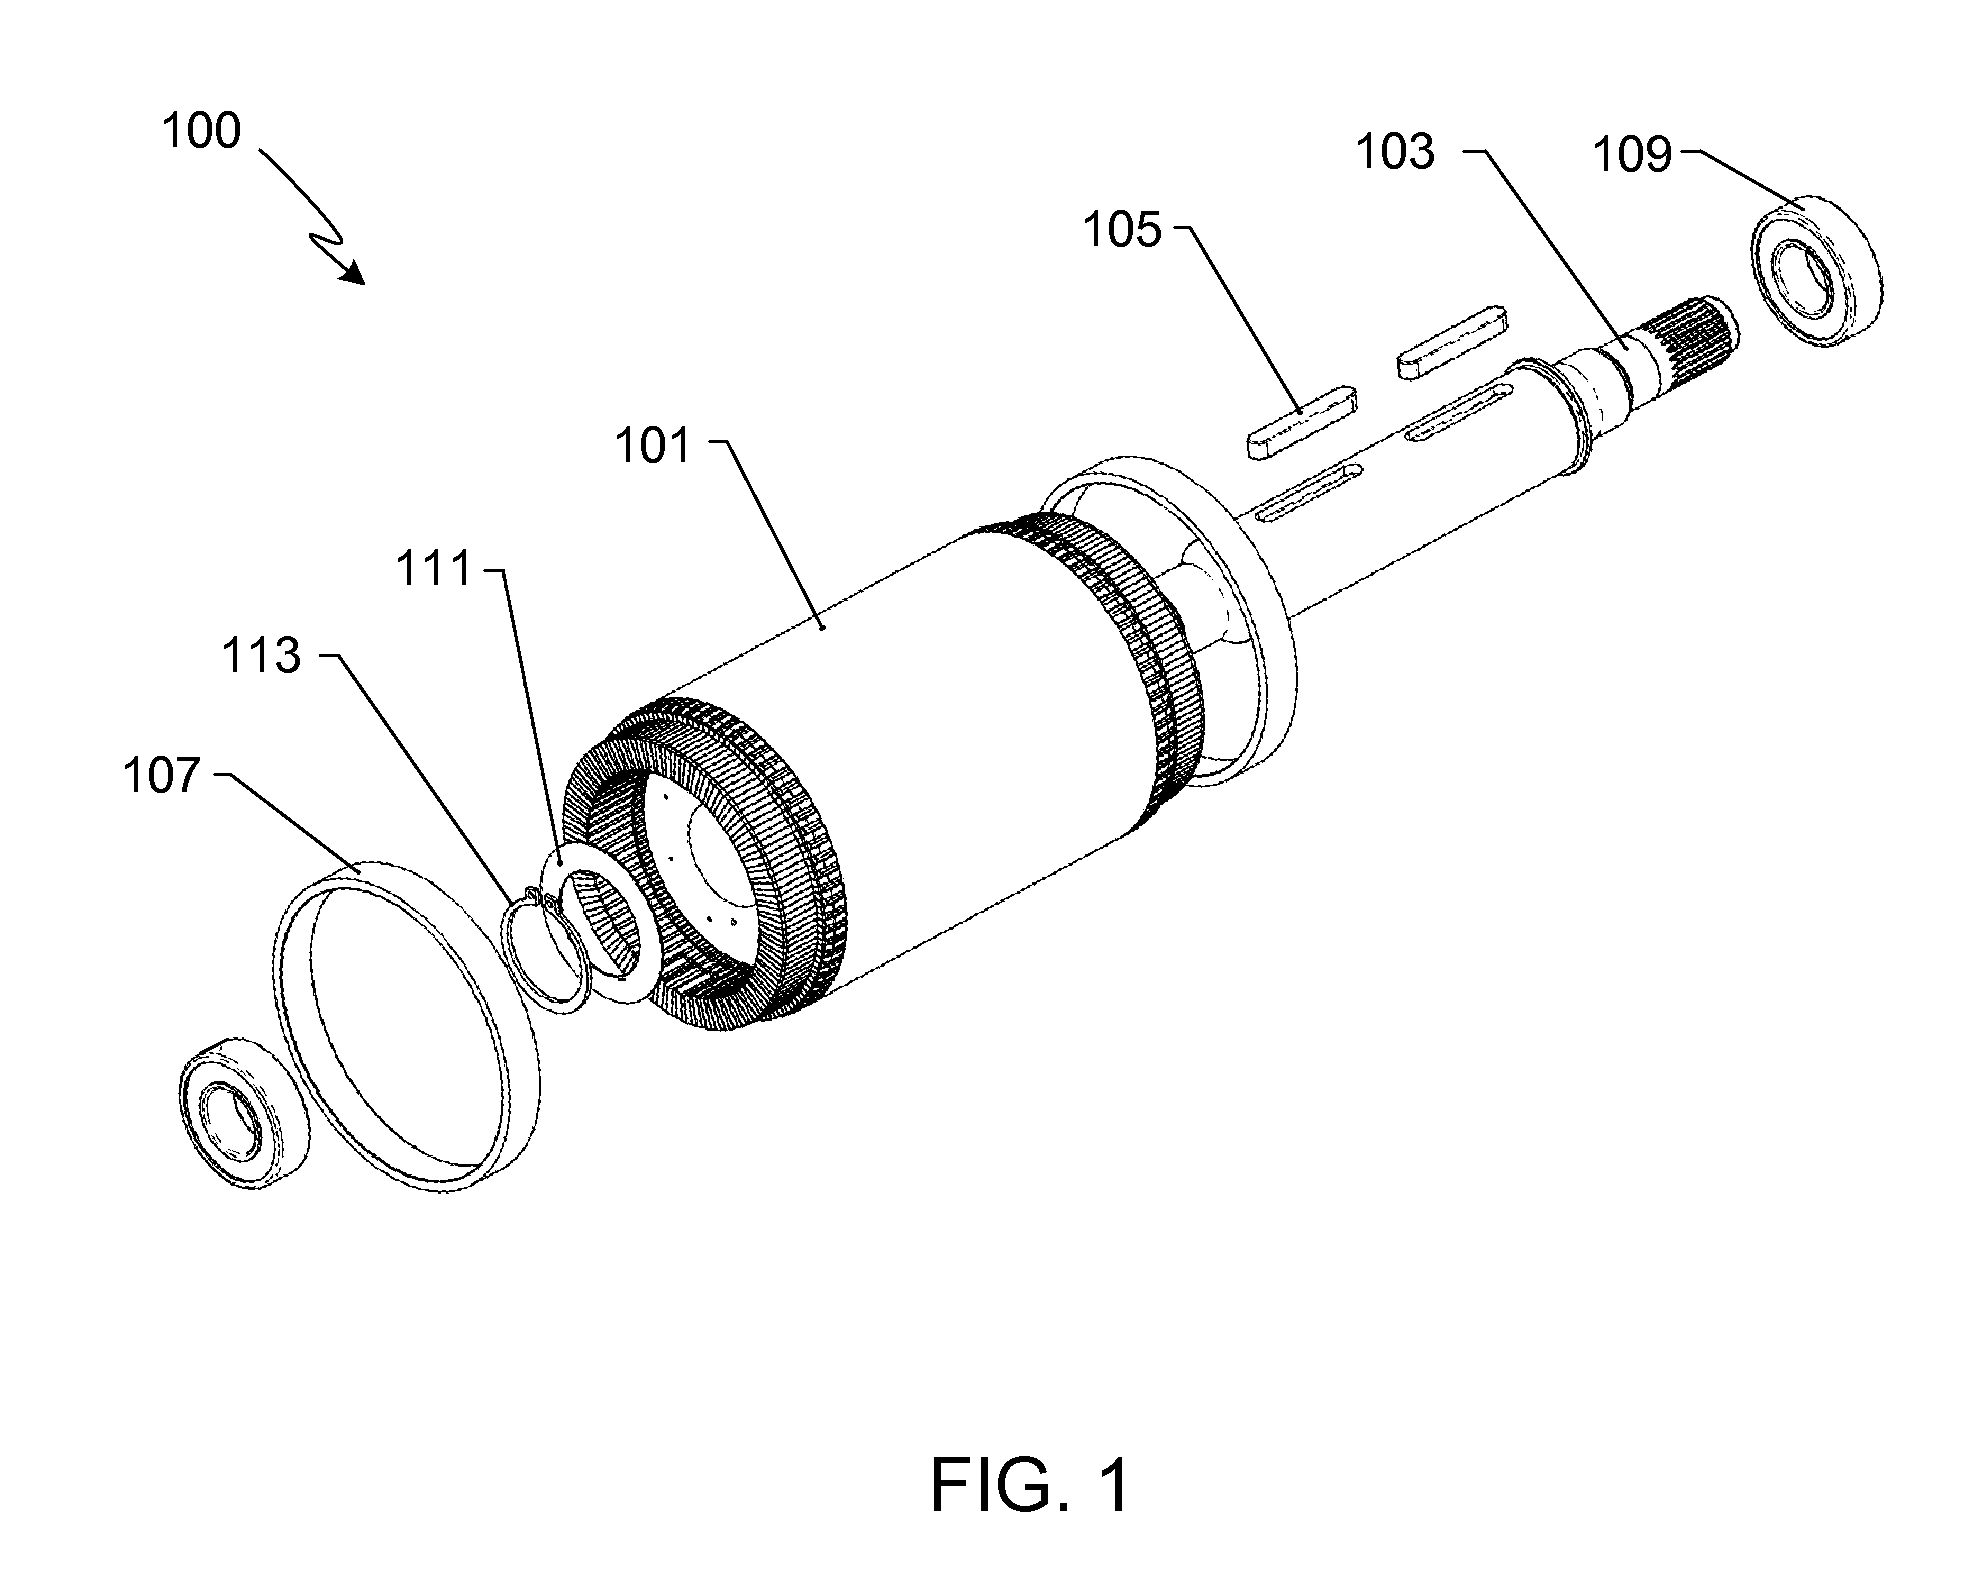 Rotor Design for an Electric Motor